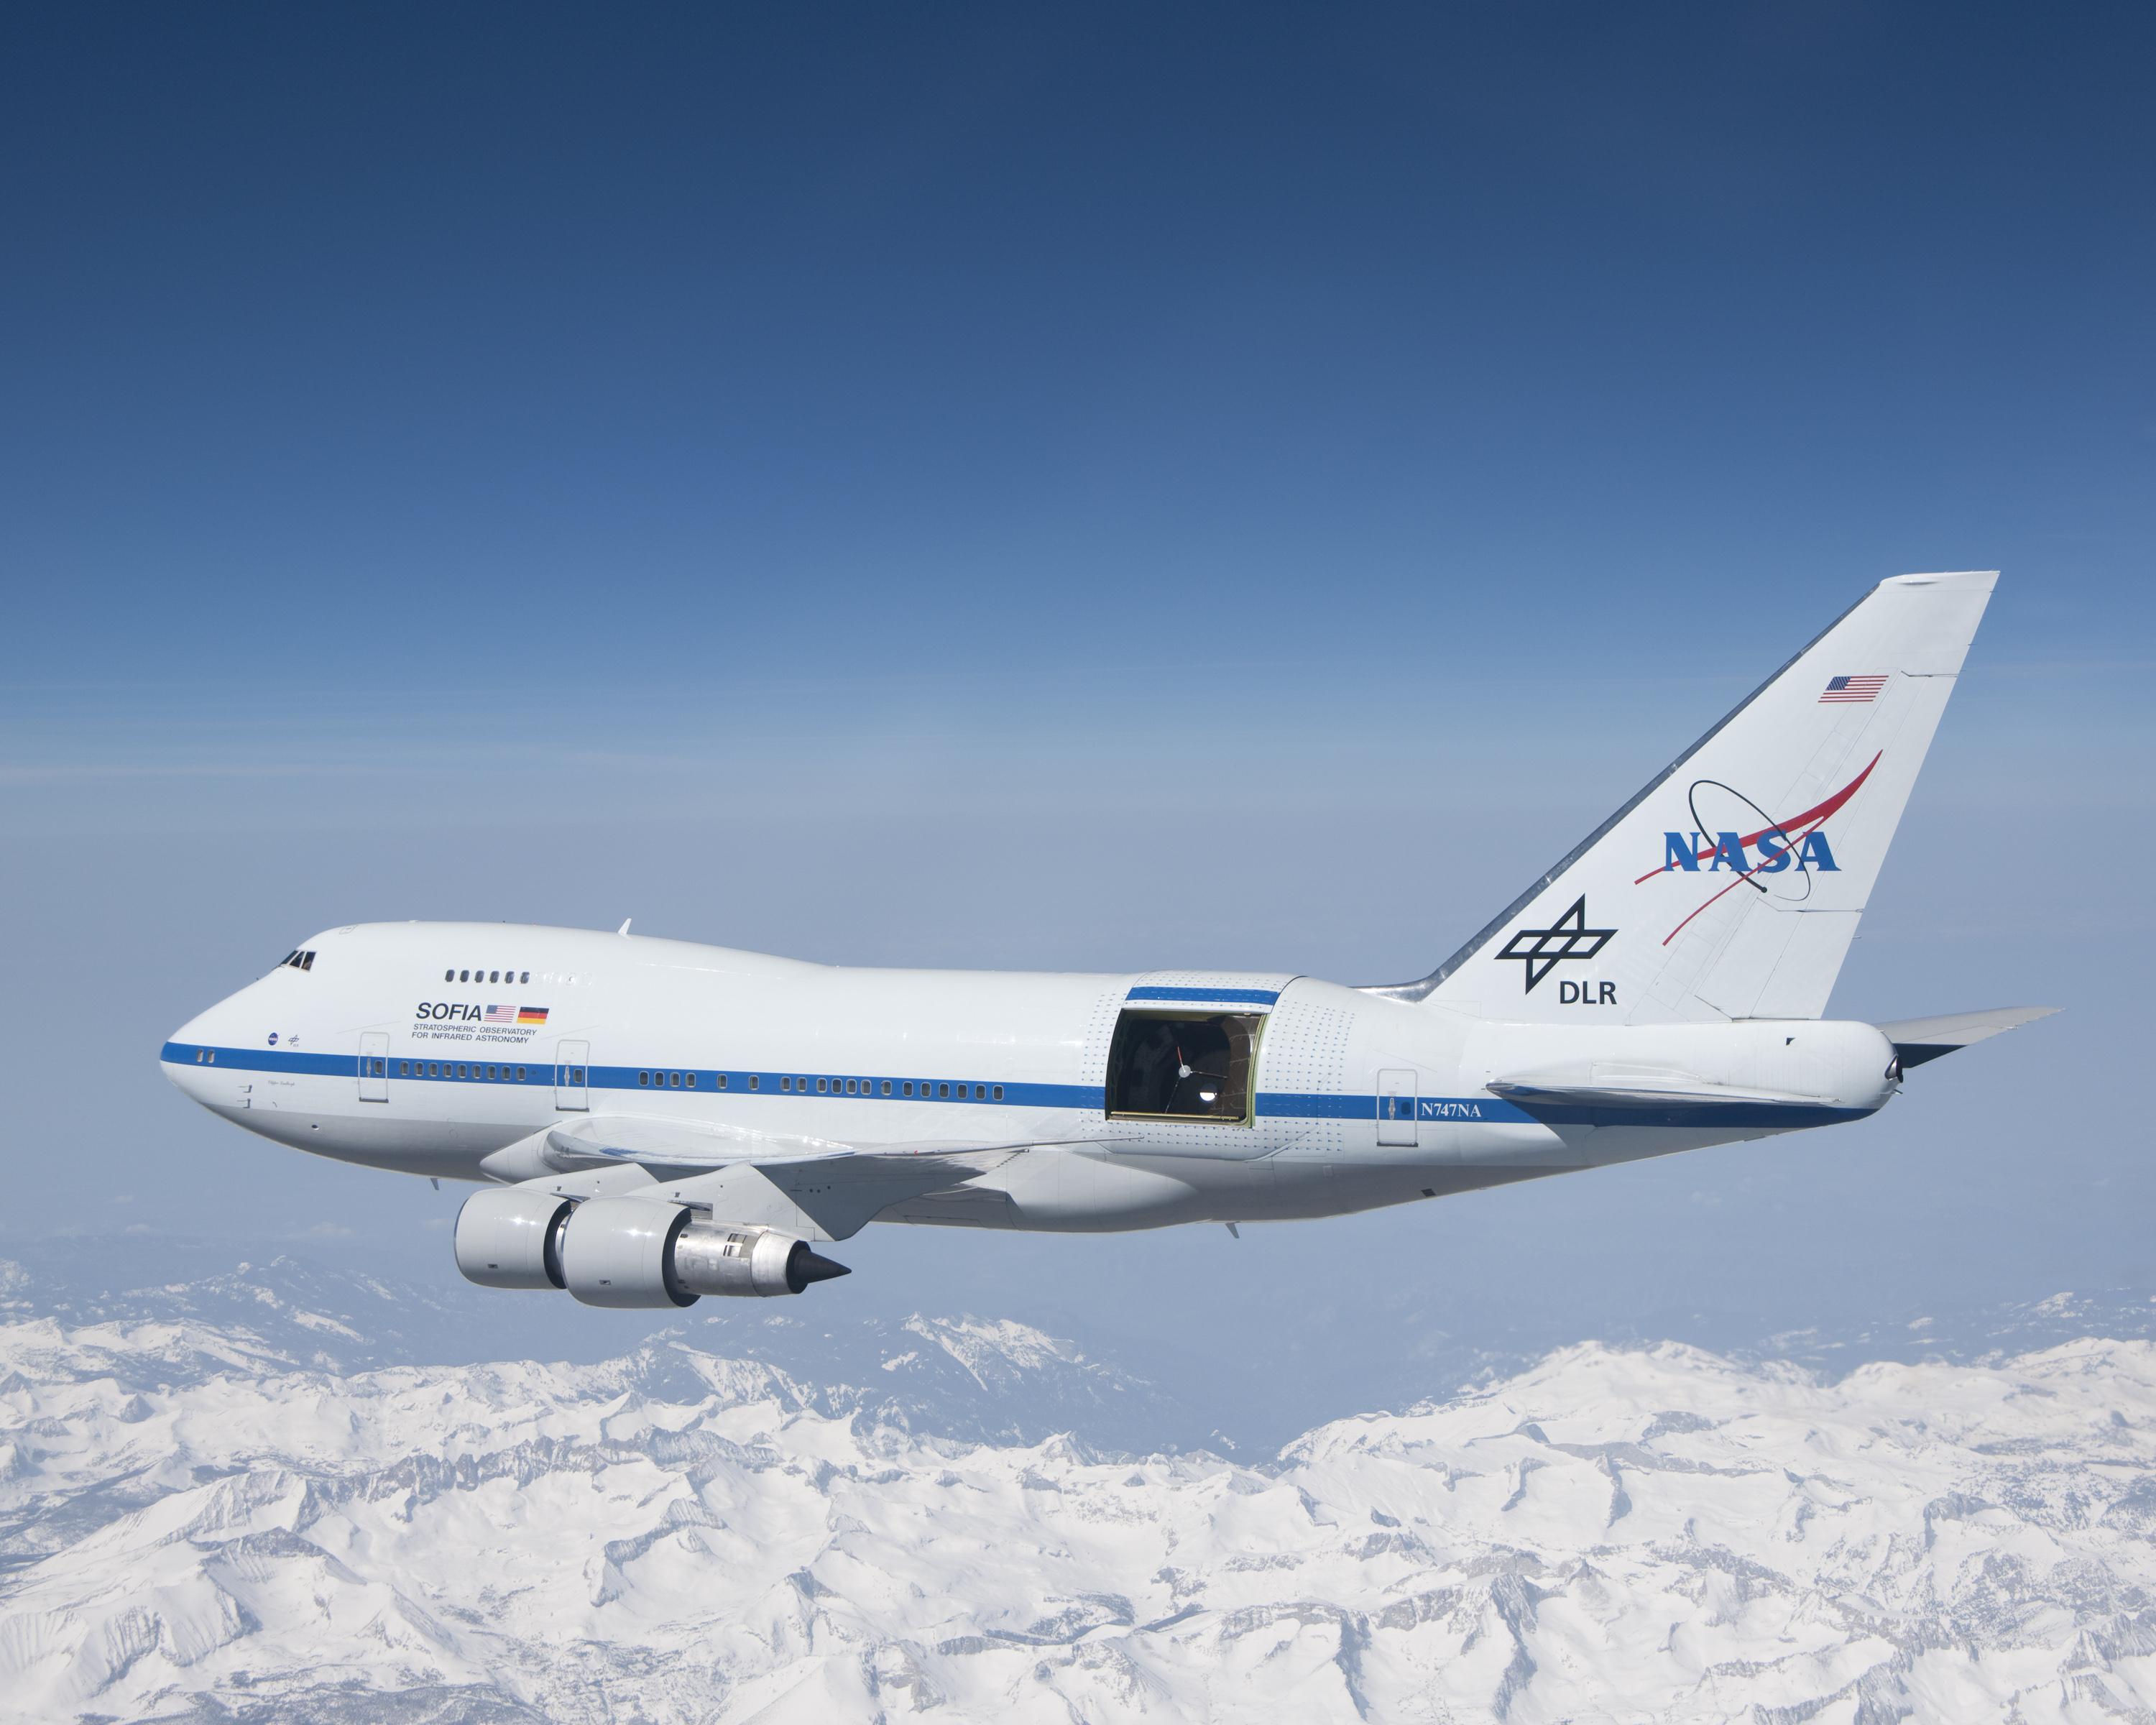 NASA's observatory in an airplane, SOFIA, takes last flight